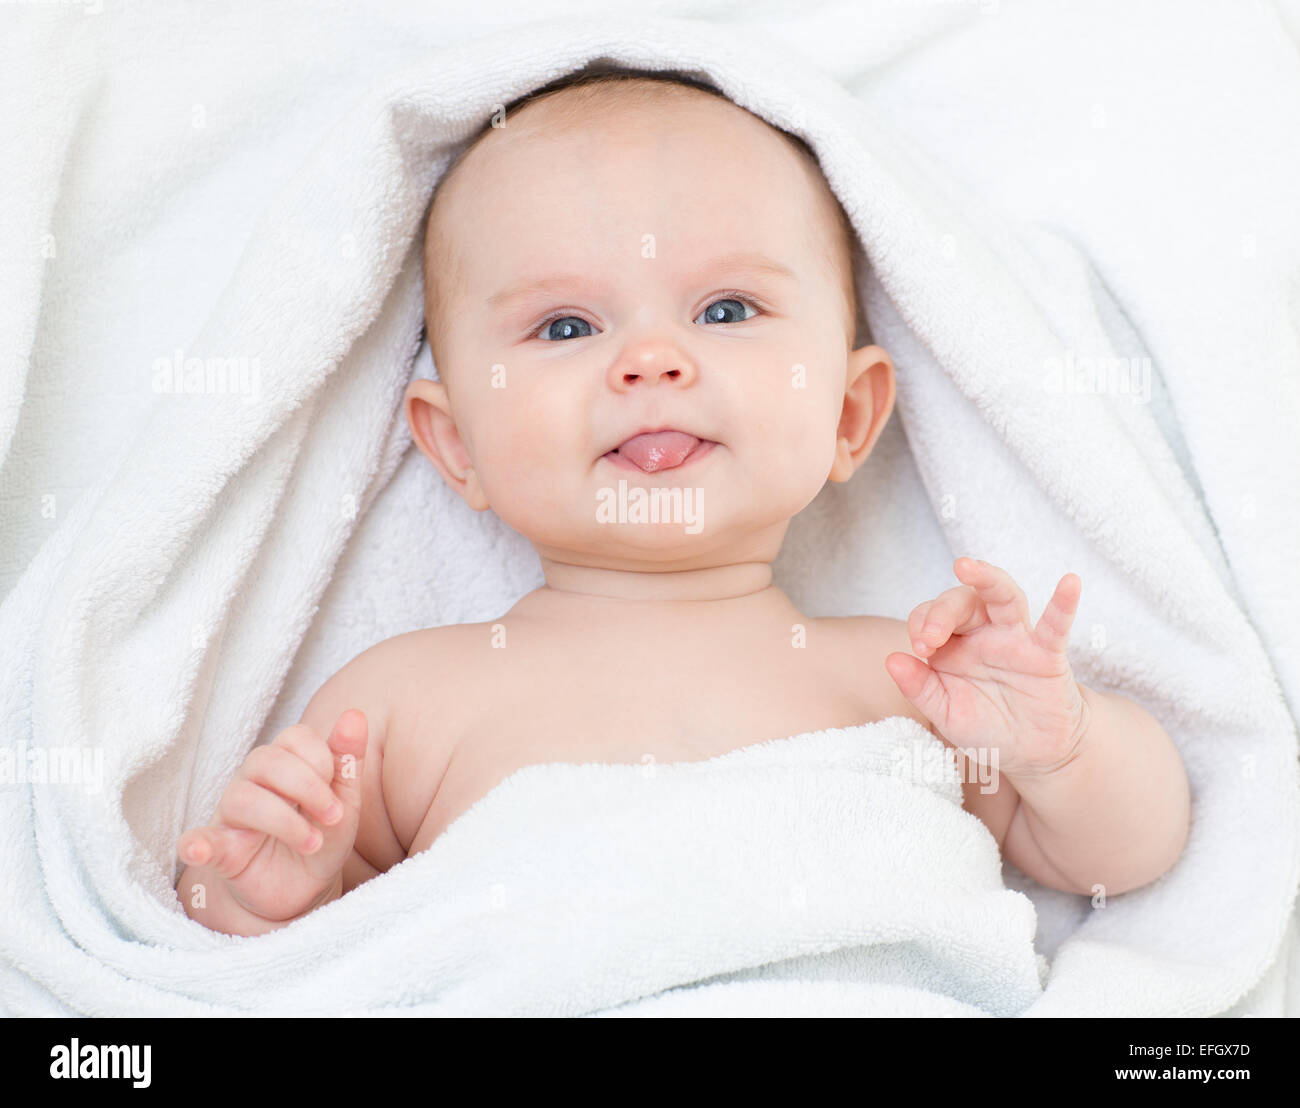 Cute funny baby in bathing towel showing tongue Stock Photo